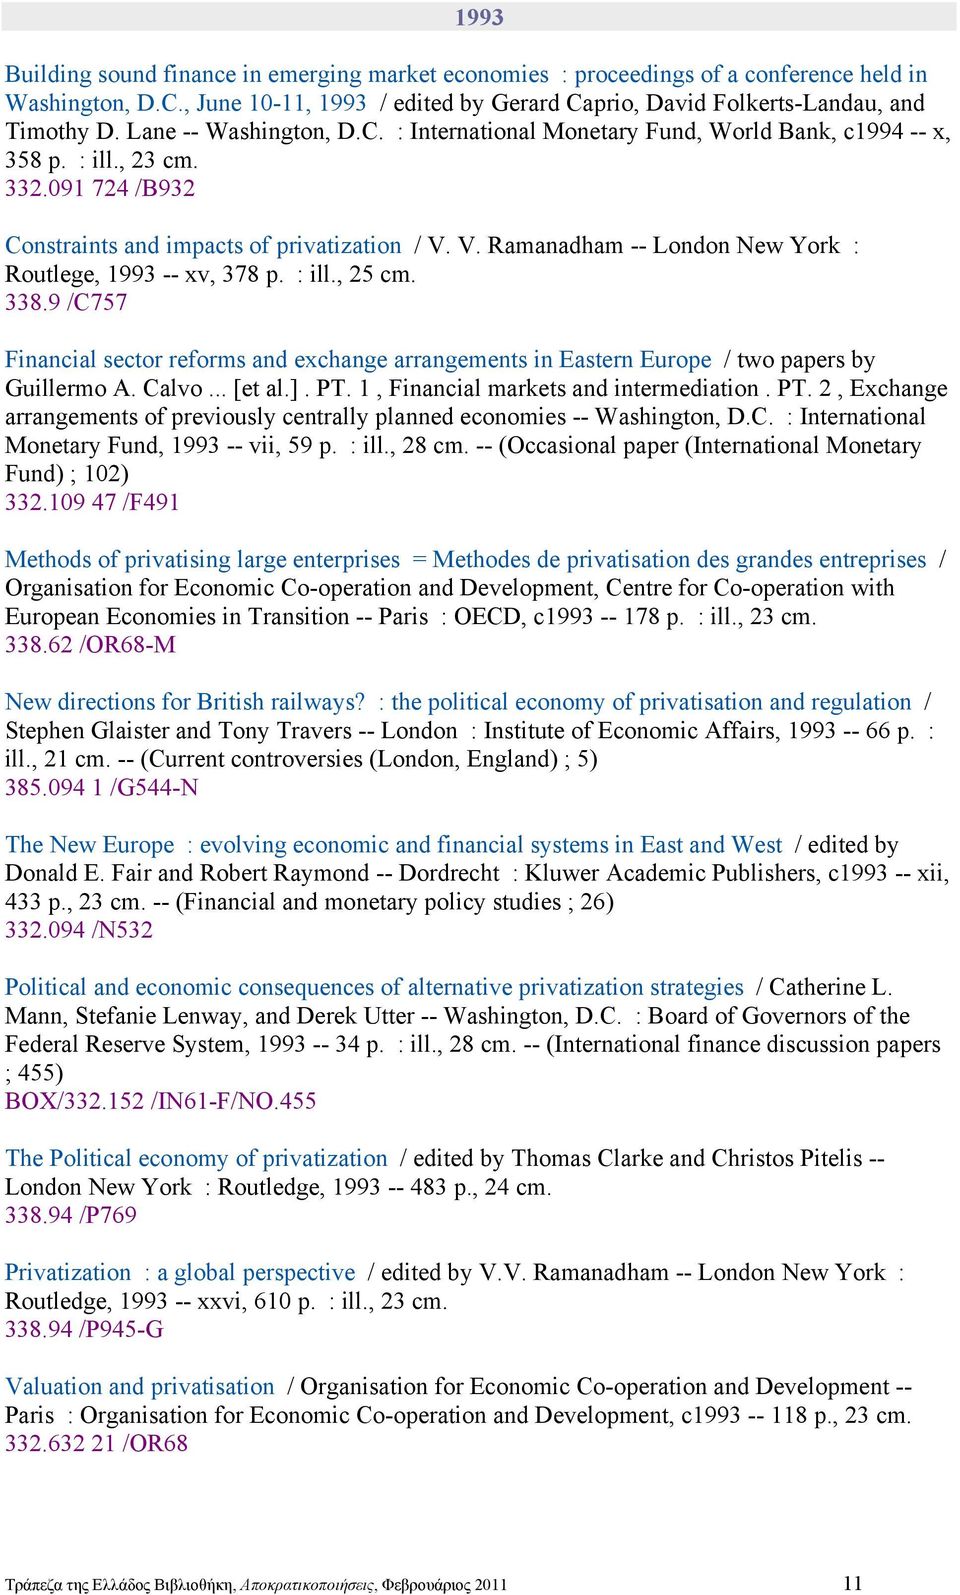 V. Ramanadham -- London New York : Routlege, 1993 -- xv, 378 p. : ill., 25 cm. 338.9 /C757 Financial sector reforms and exchange arrangements in Eastern Europe / two papers by Guillermo A. Calvo.